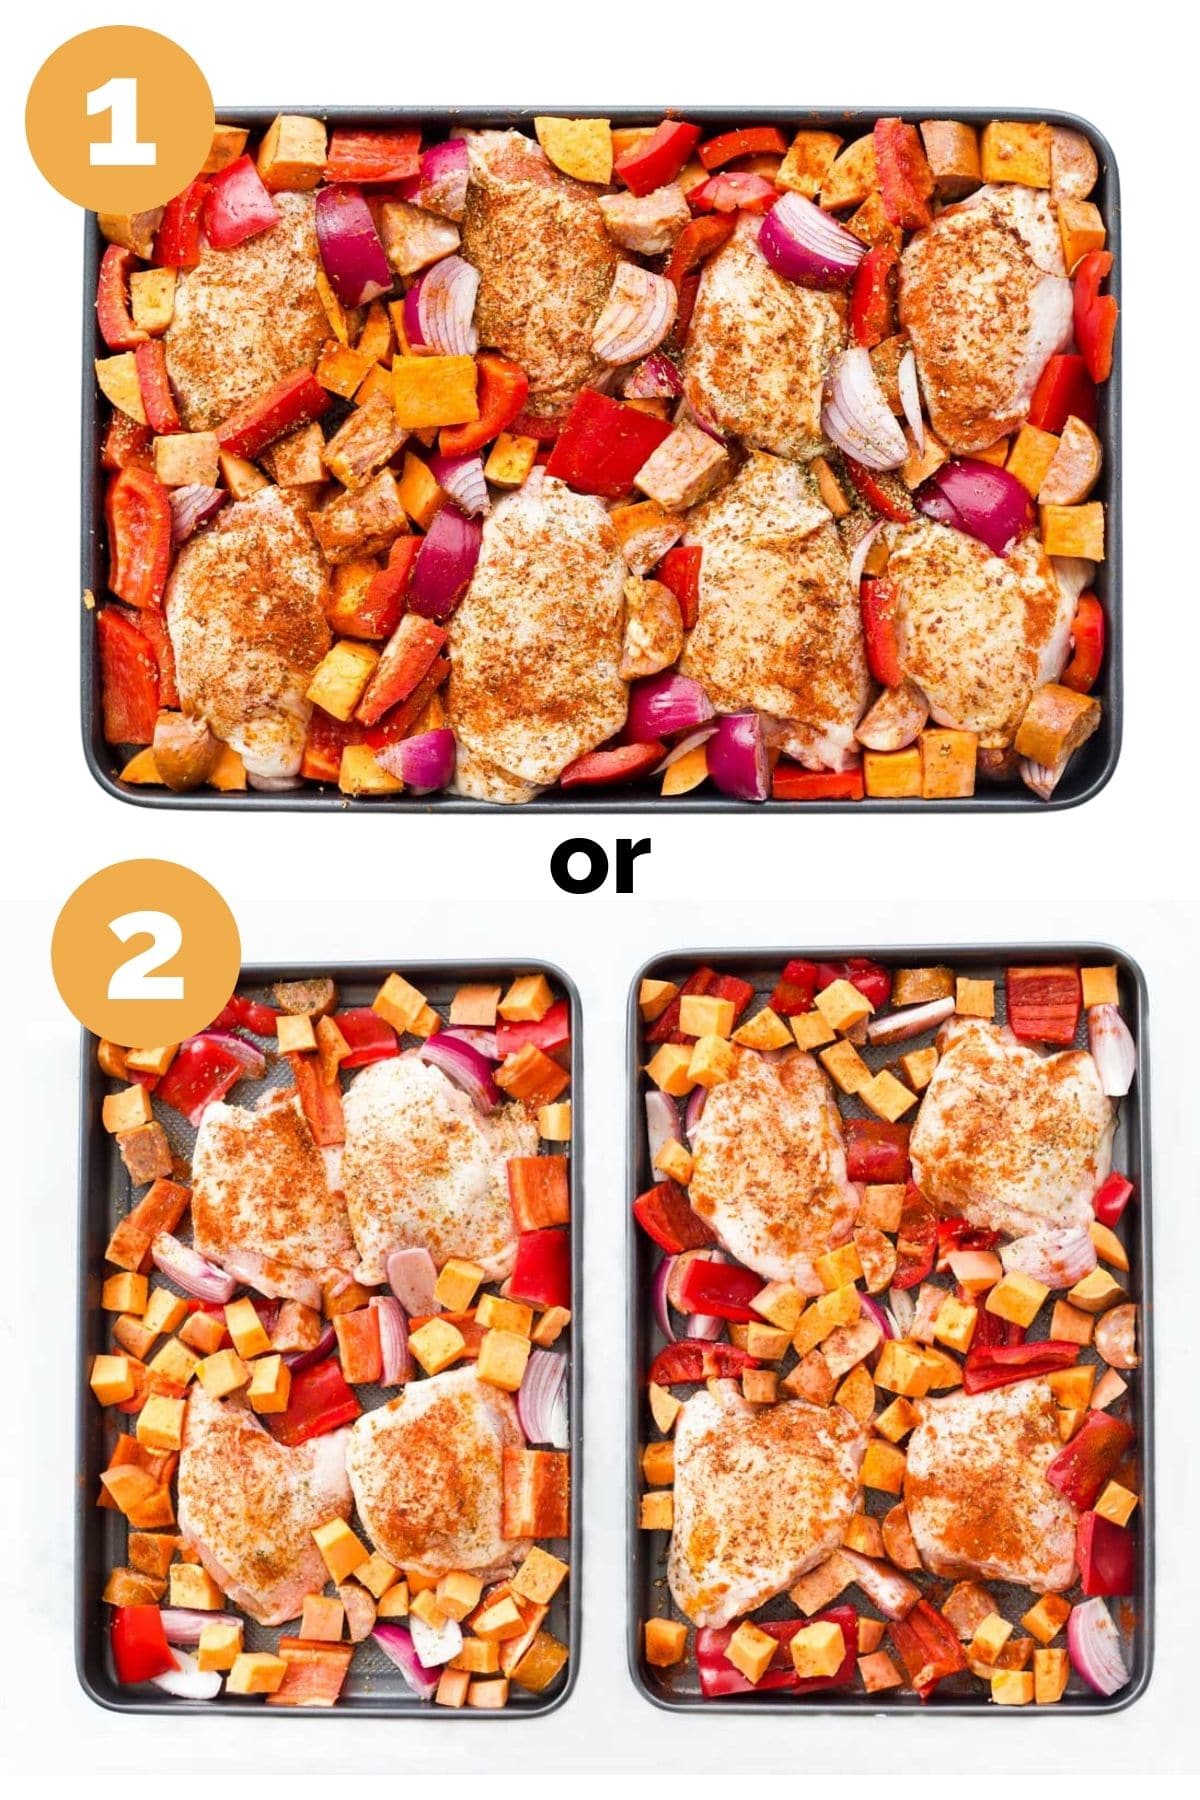 Collage of 2 Images Showing Chicken Tray Bake Ingredients in 1 Tray versus 2 Trays.